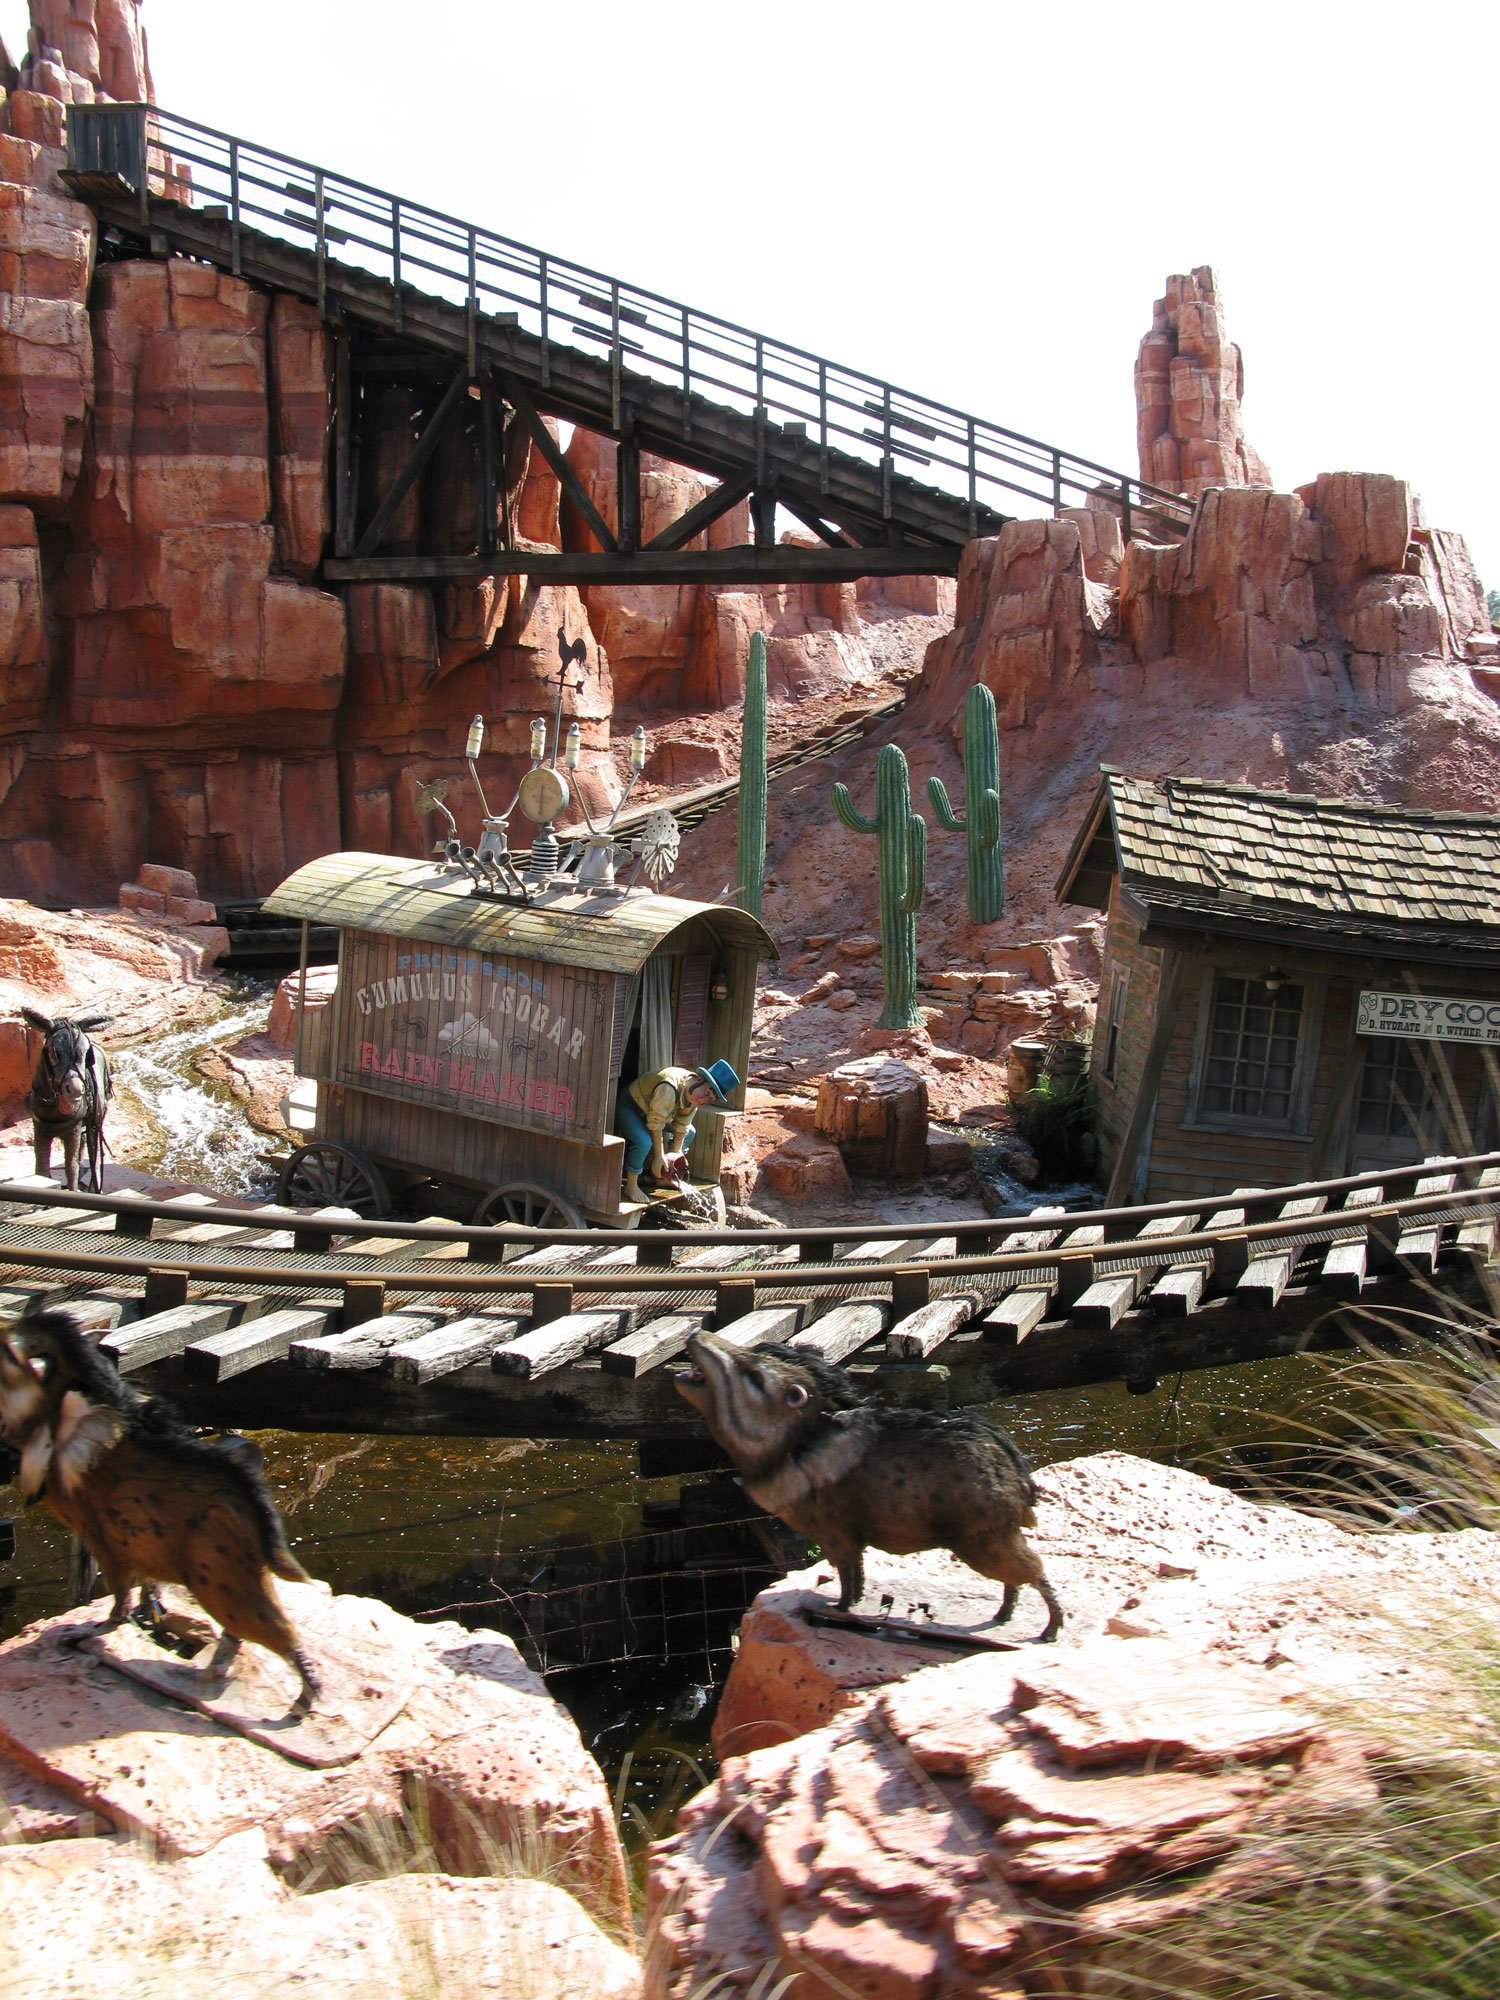 Big Thunder Mountain from the train